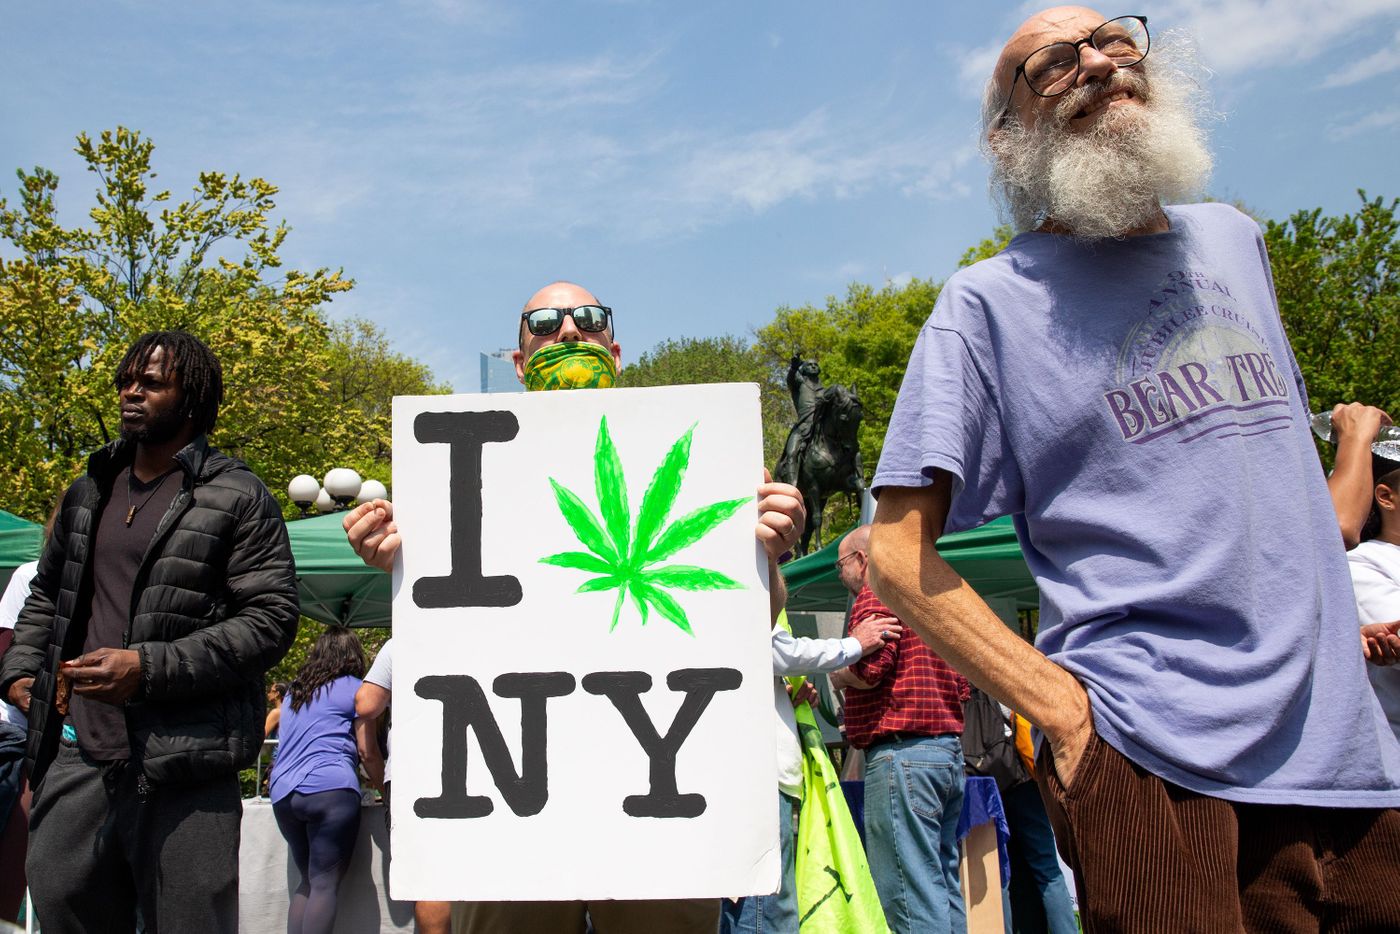 Hundreds of people packed into Union Square for a rally advocating the legalization of recreational marijuana use, May 4, 2019.